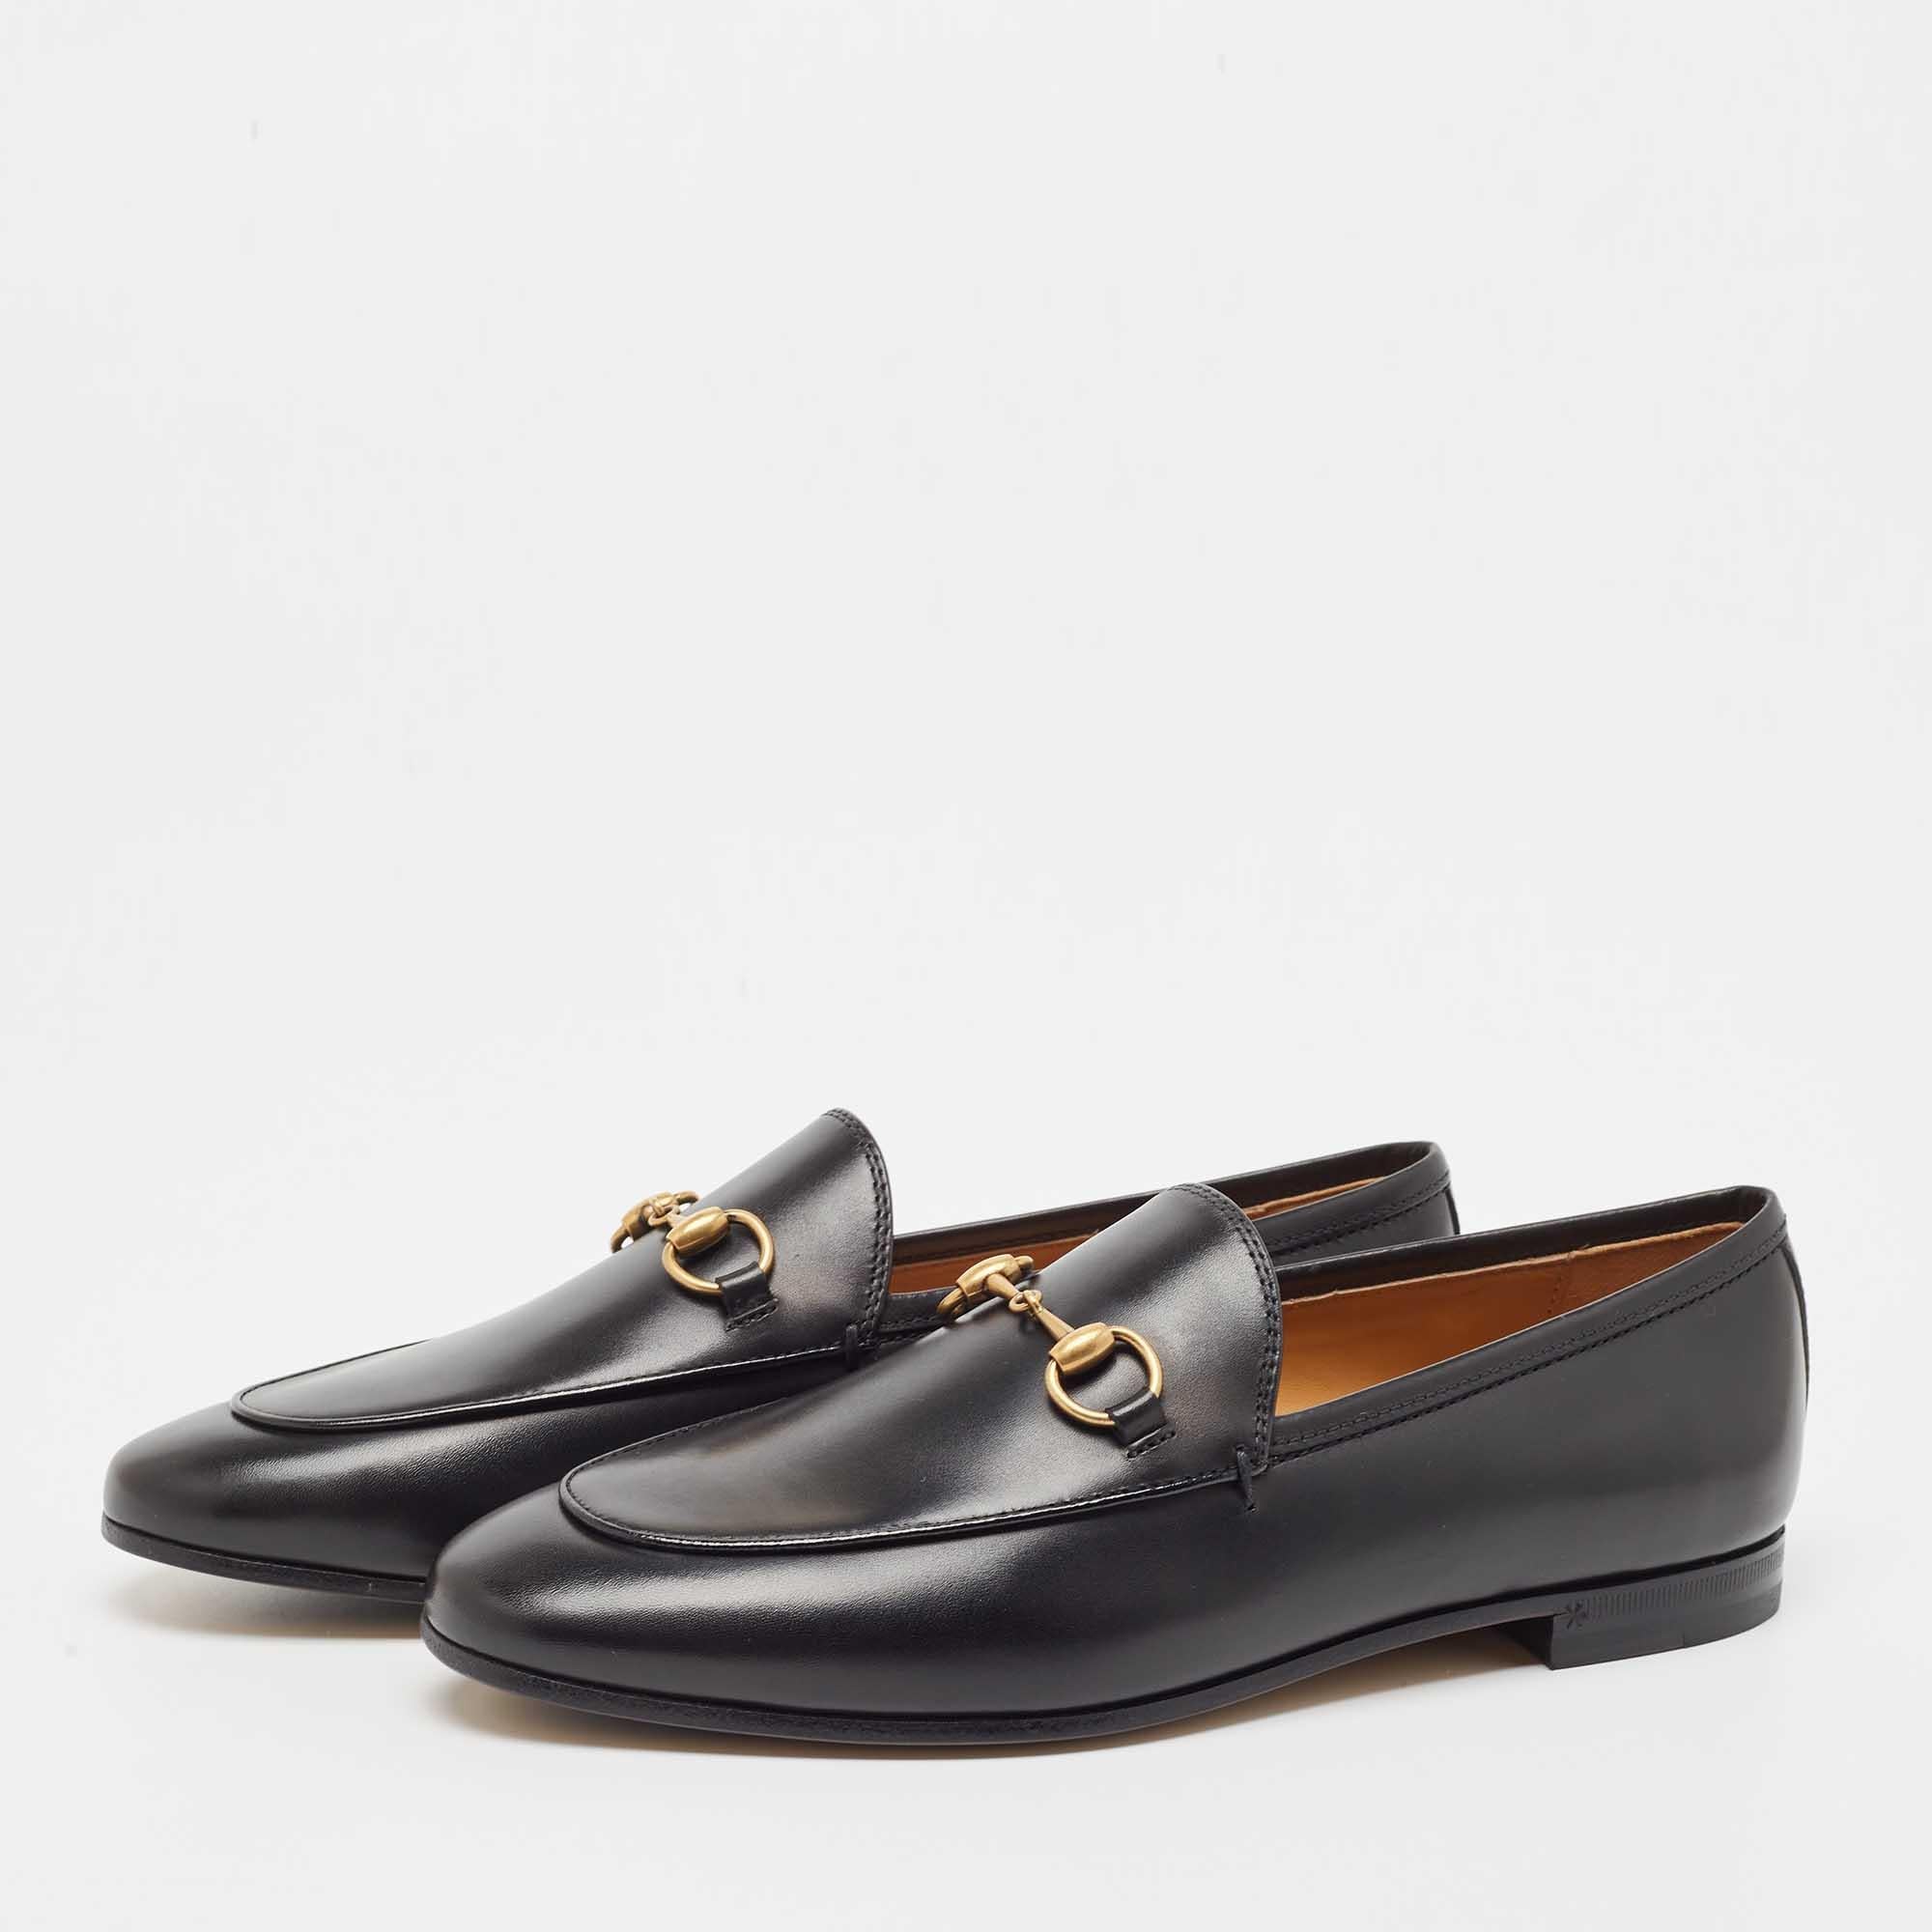 Practical, fashionable, and durable—these Gucci Jordaan loafers are carefully built to be fine companions to your everyday style. They come made using the best materials to be a prized buy.

